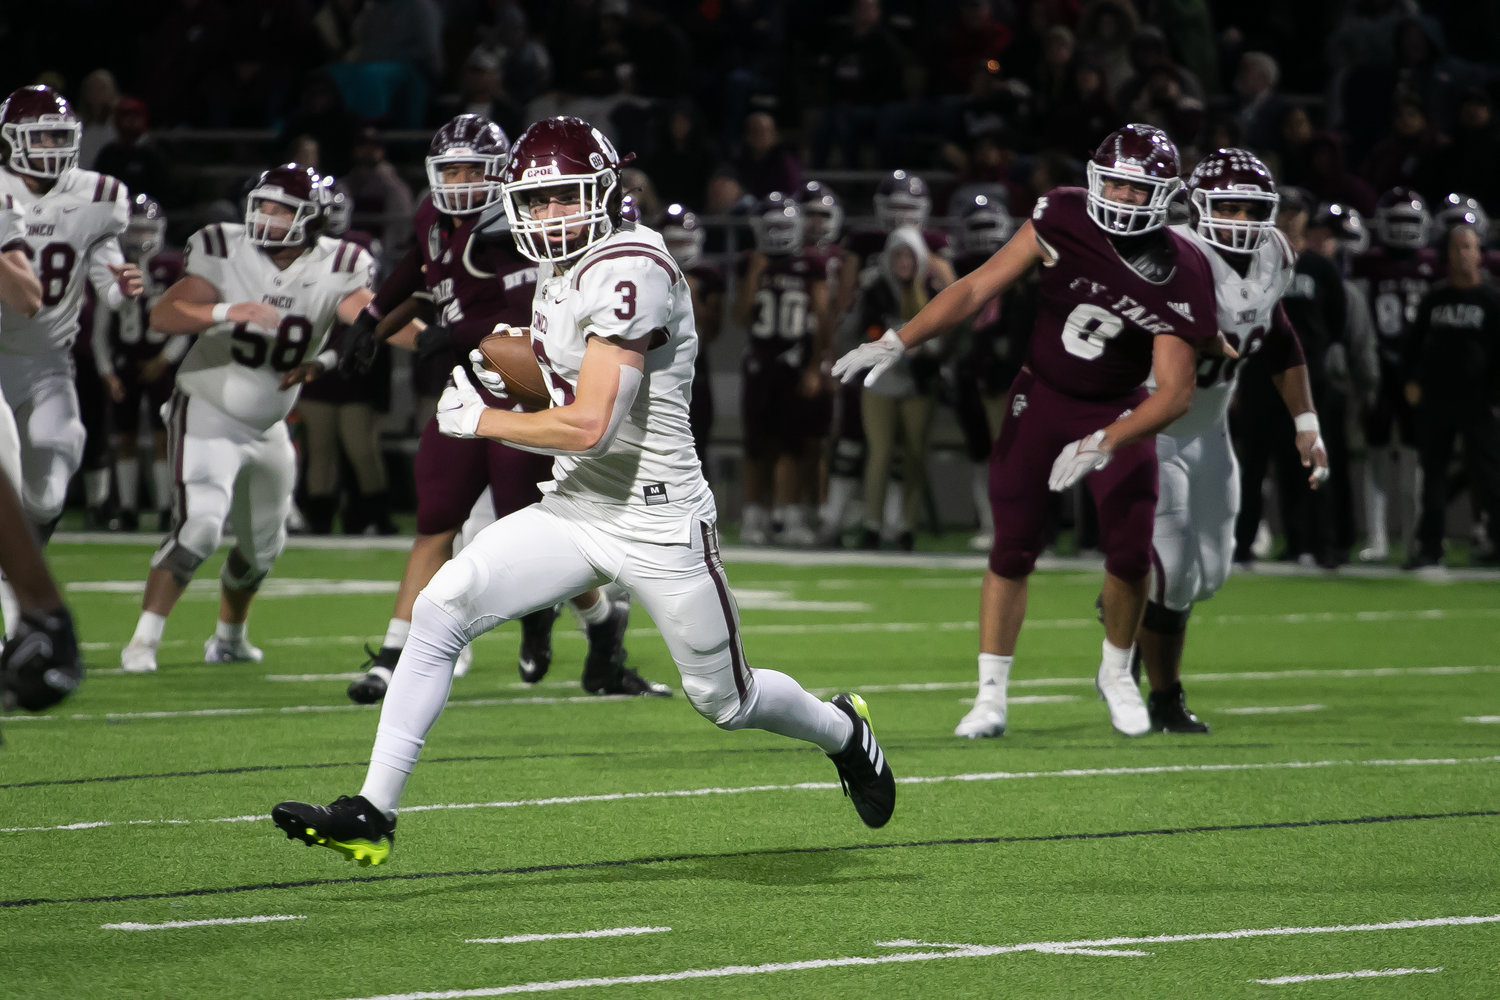 Seth Salverino runs upfield after making a catch during Friday's Class 6A-Division I area round game between Cinco Ranch and Cy-Fair at Pridgeon Stadium.